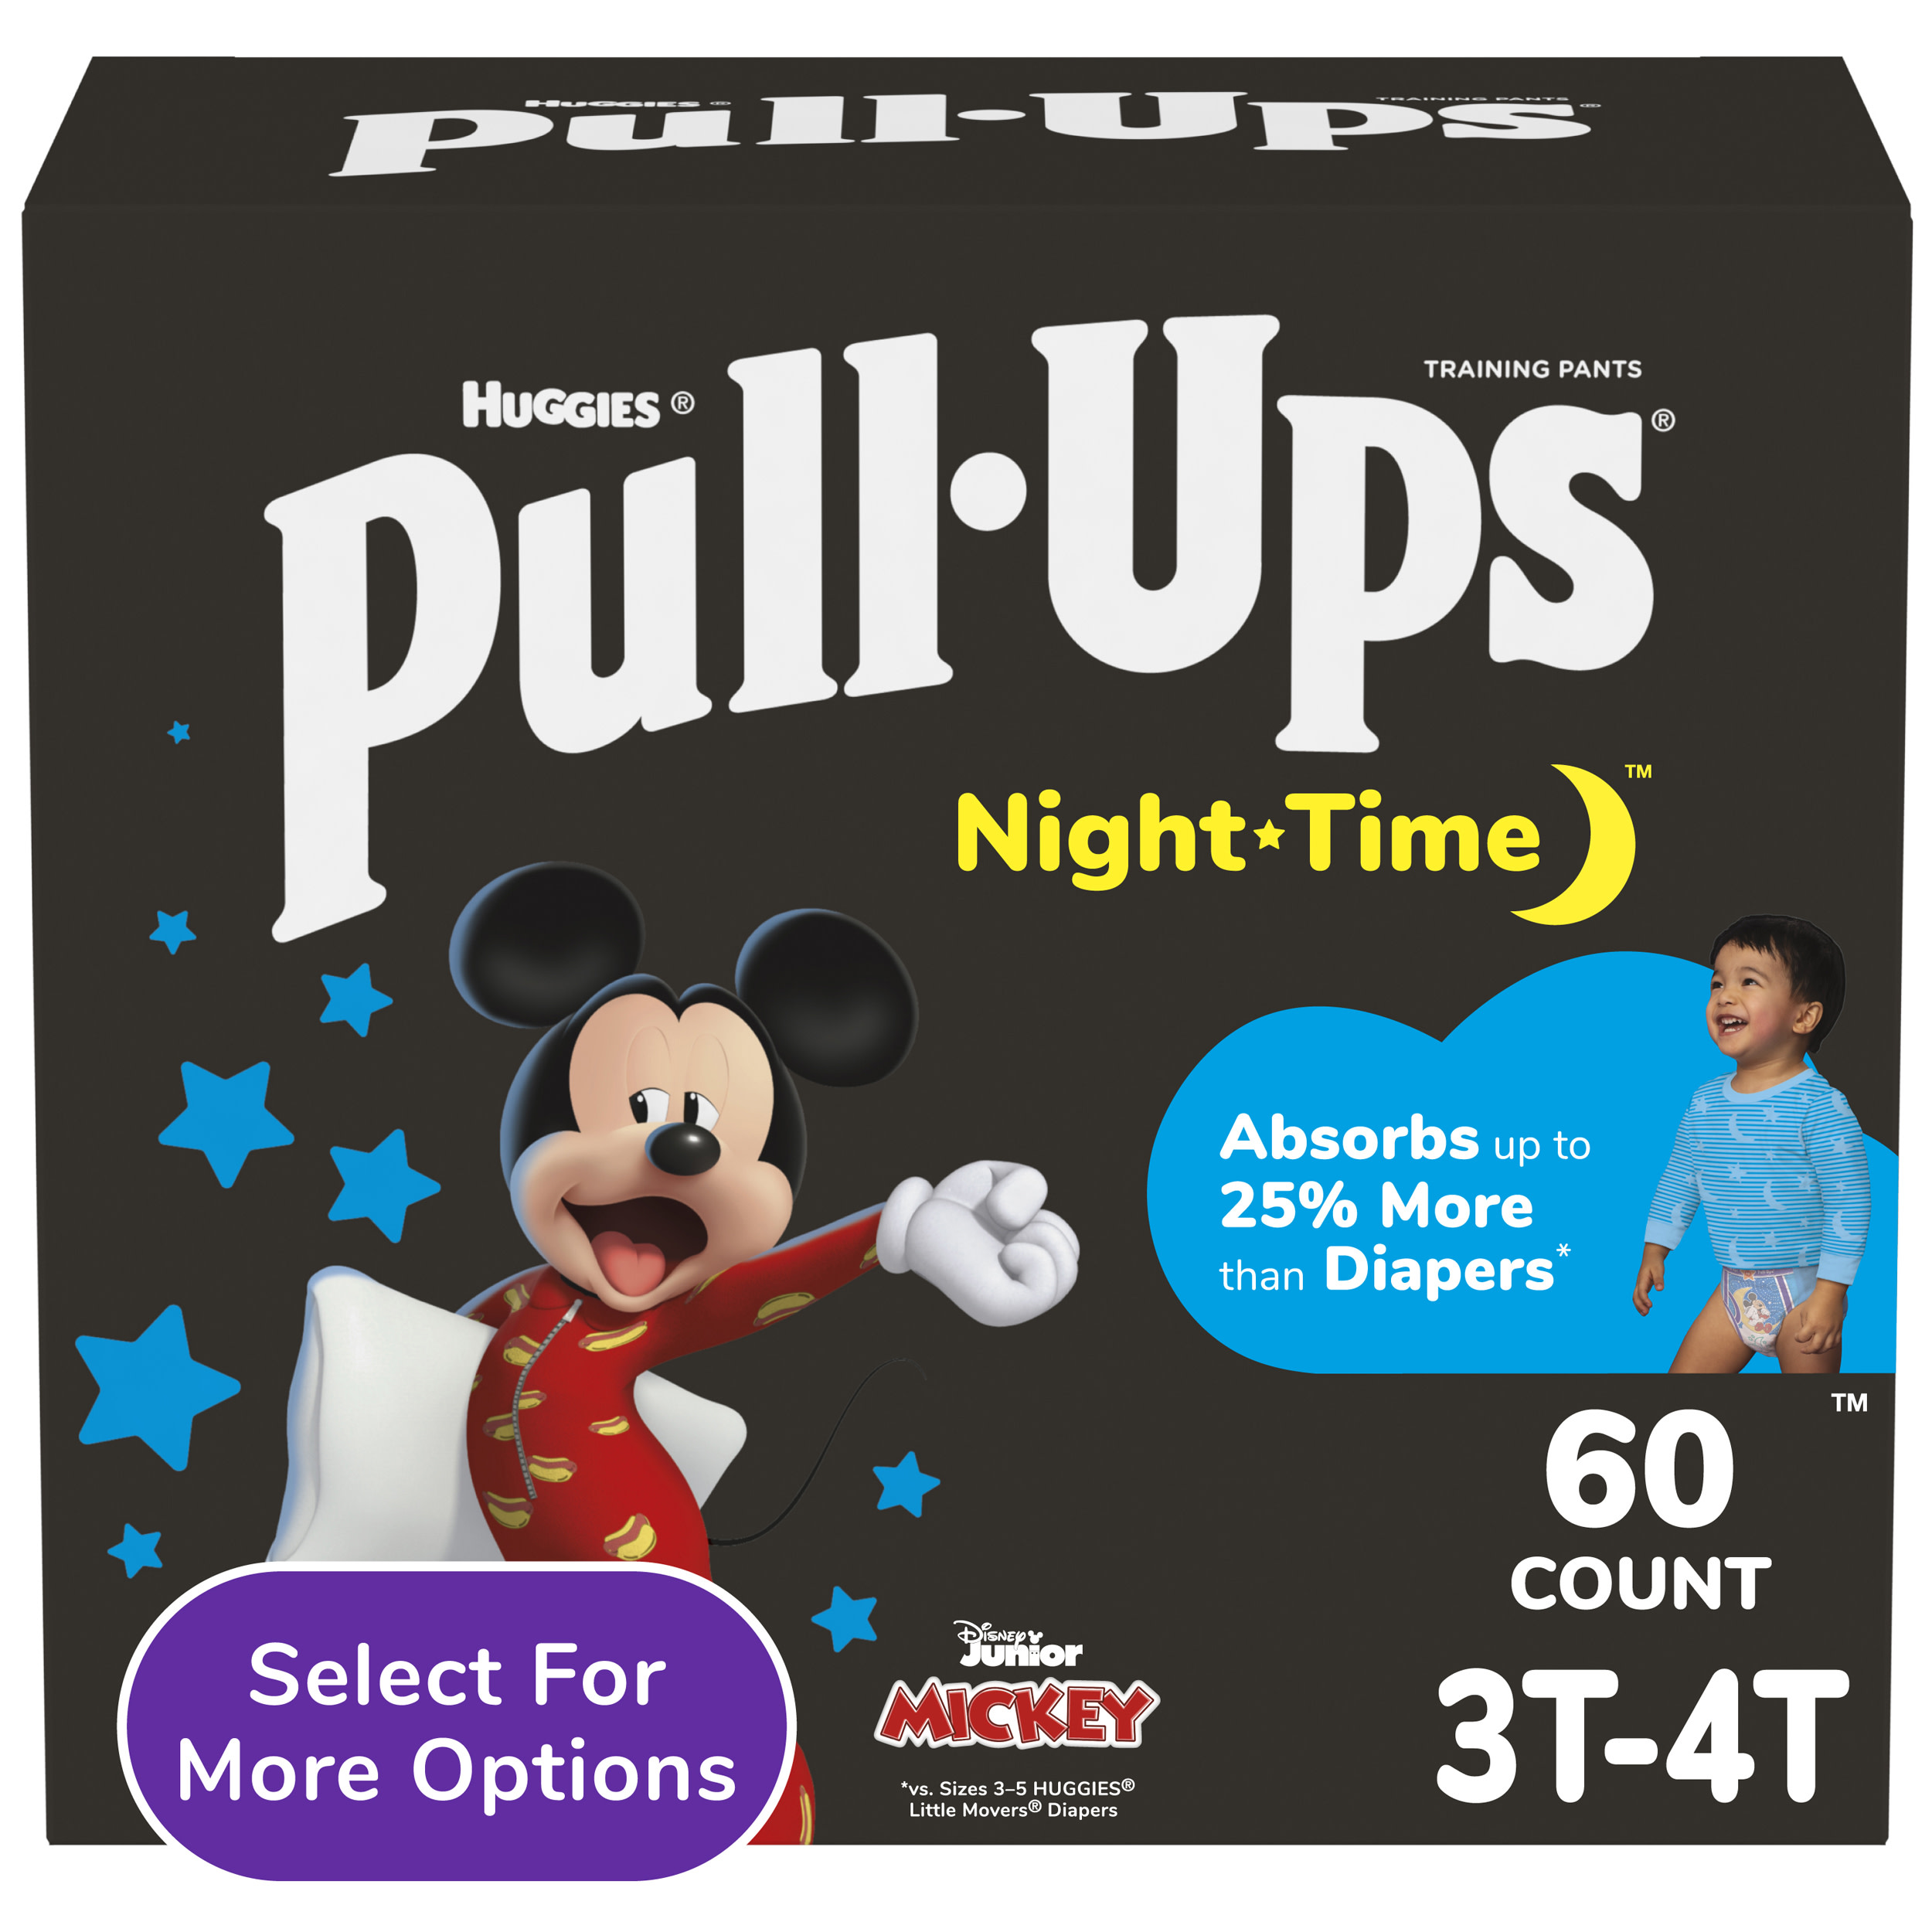 Pull-Ups Boys' Night-Time Training Pants, 3T-4T (32-40 lbs), 60 Ct (Select for More Options) - image 1 of 12